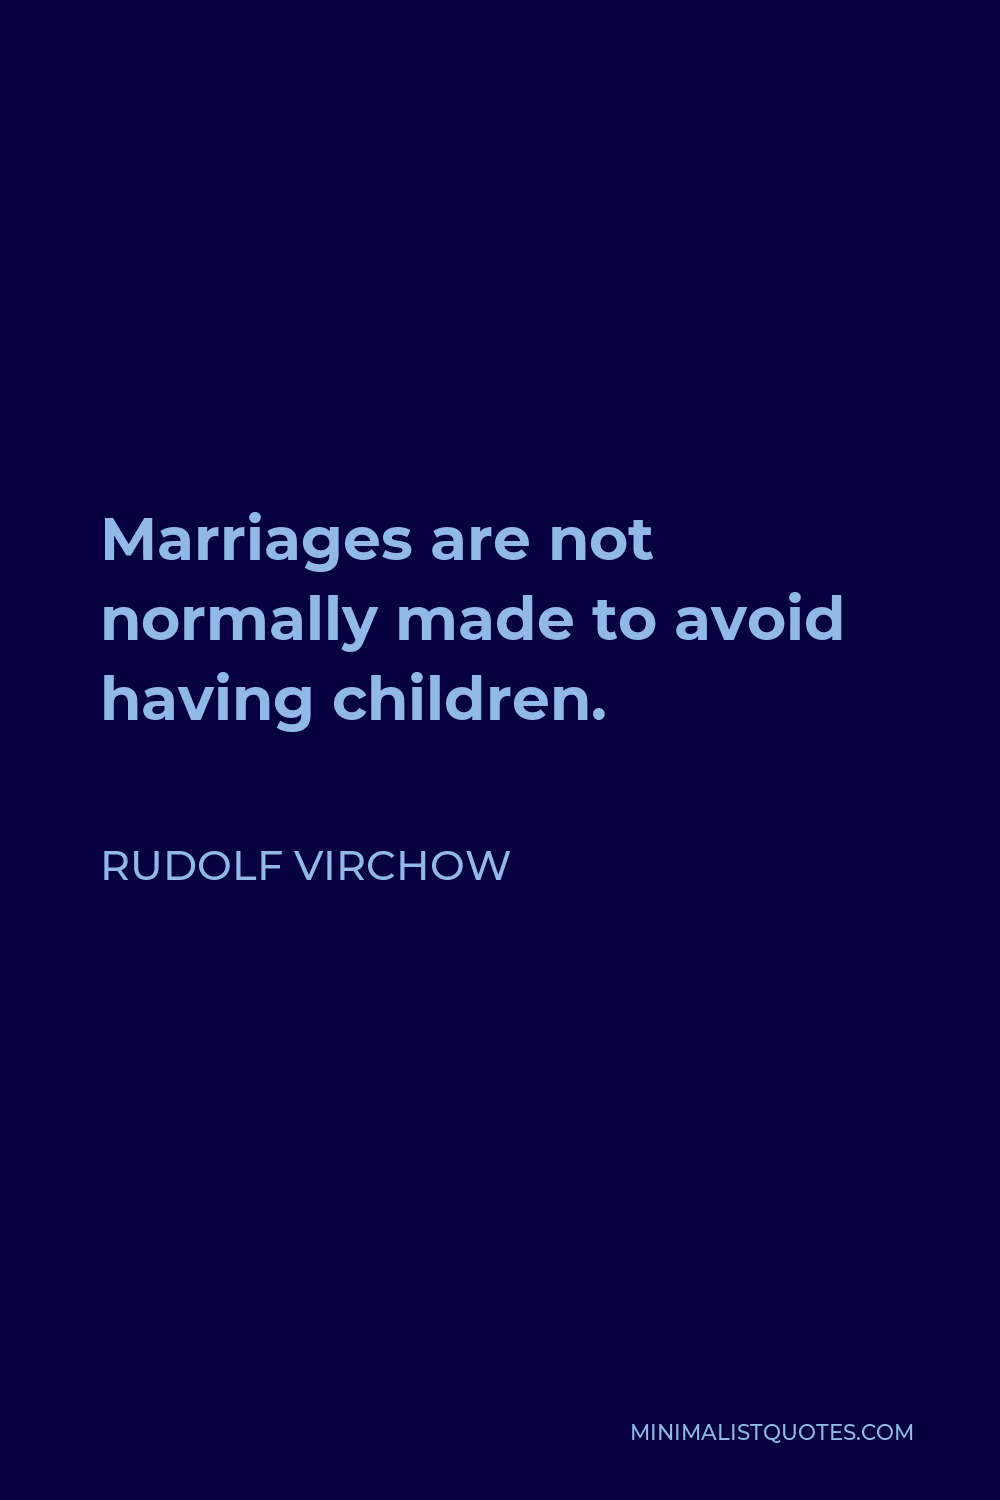 Rudolf Virchow Quote - Marriages are not normally made to avoid having children.